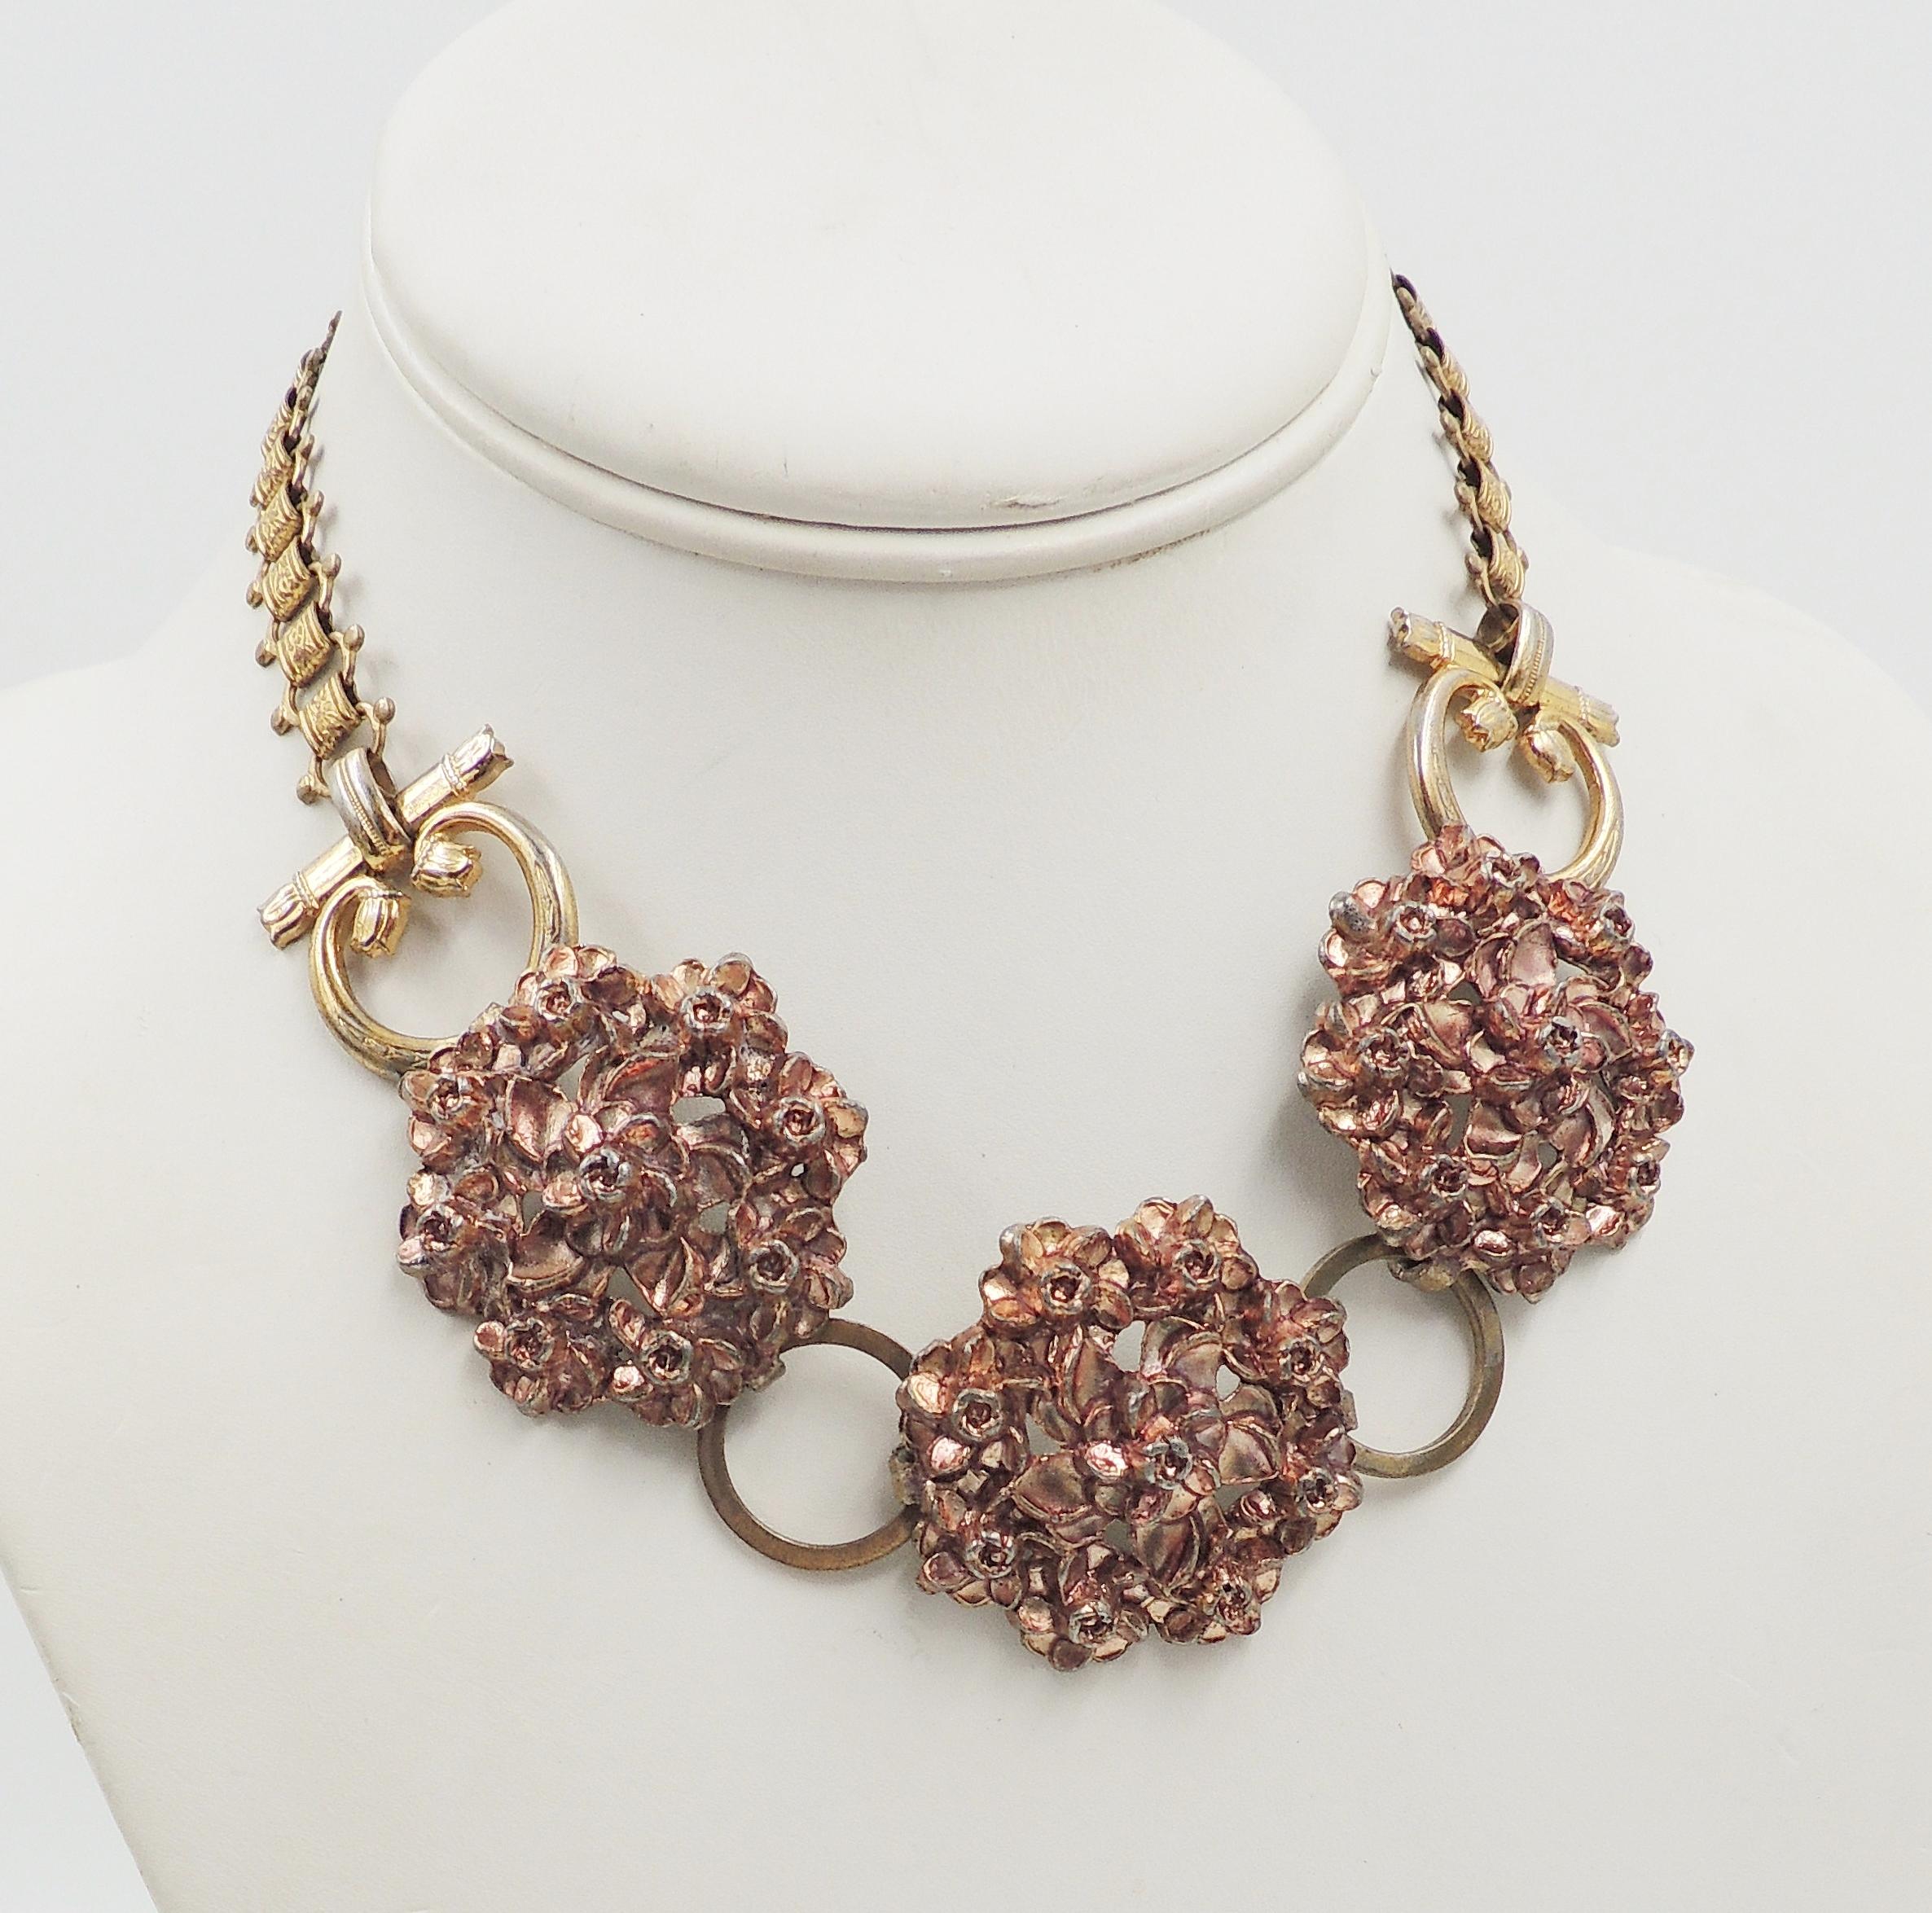 Vintage Signed Monet Etruscan Floral Necklace, 1939 In Good Condition For Sale In Easton, PA